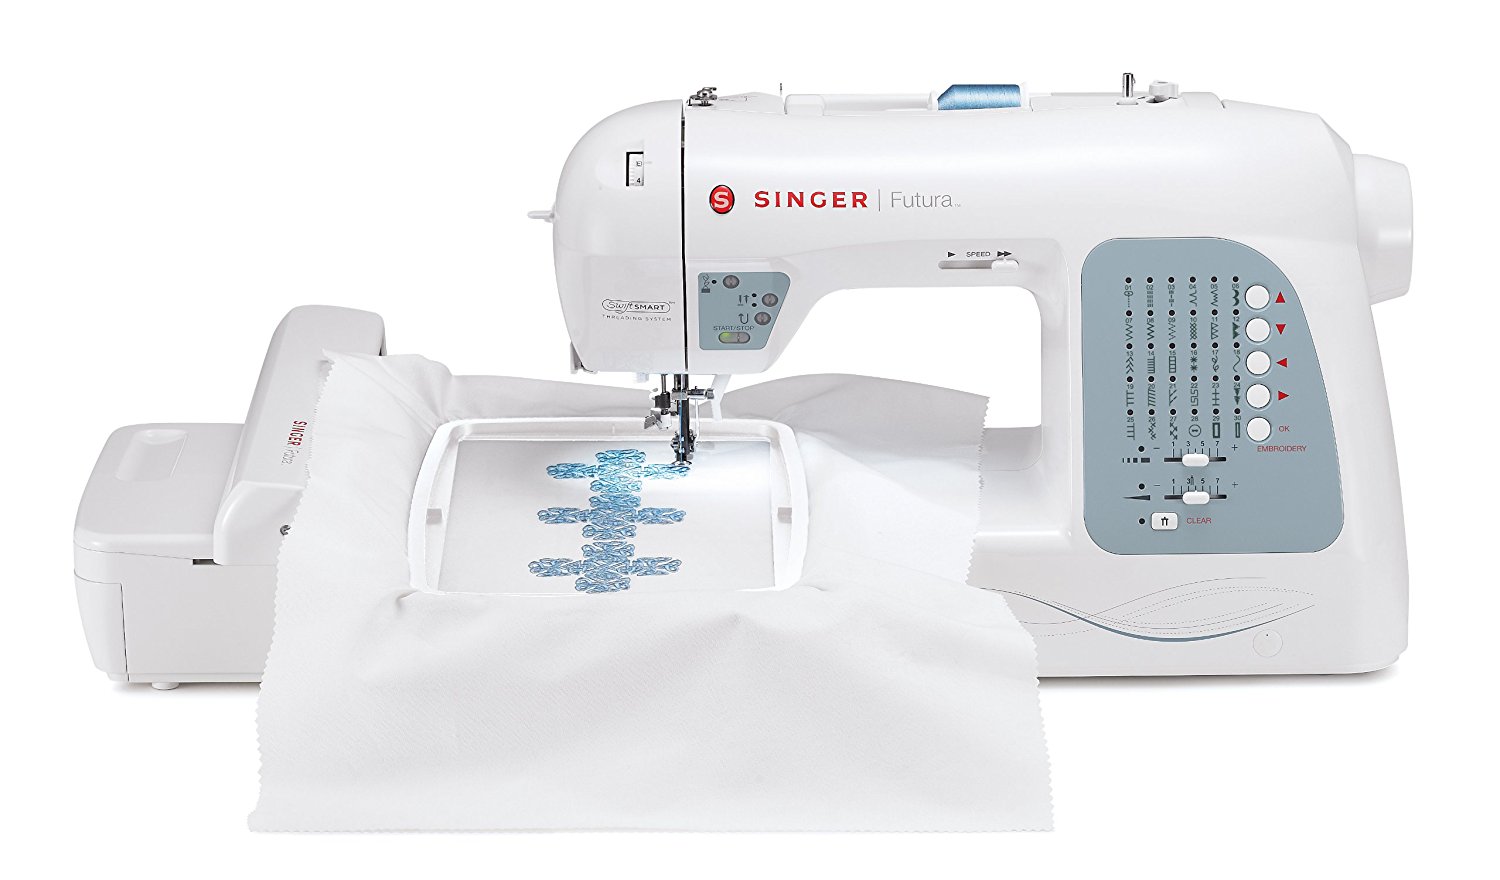 Singer Sewing and Embroidery Machine: A unique combo machine that Singer always boasts of